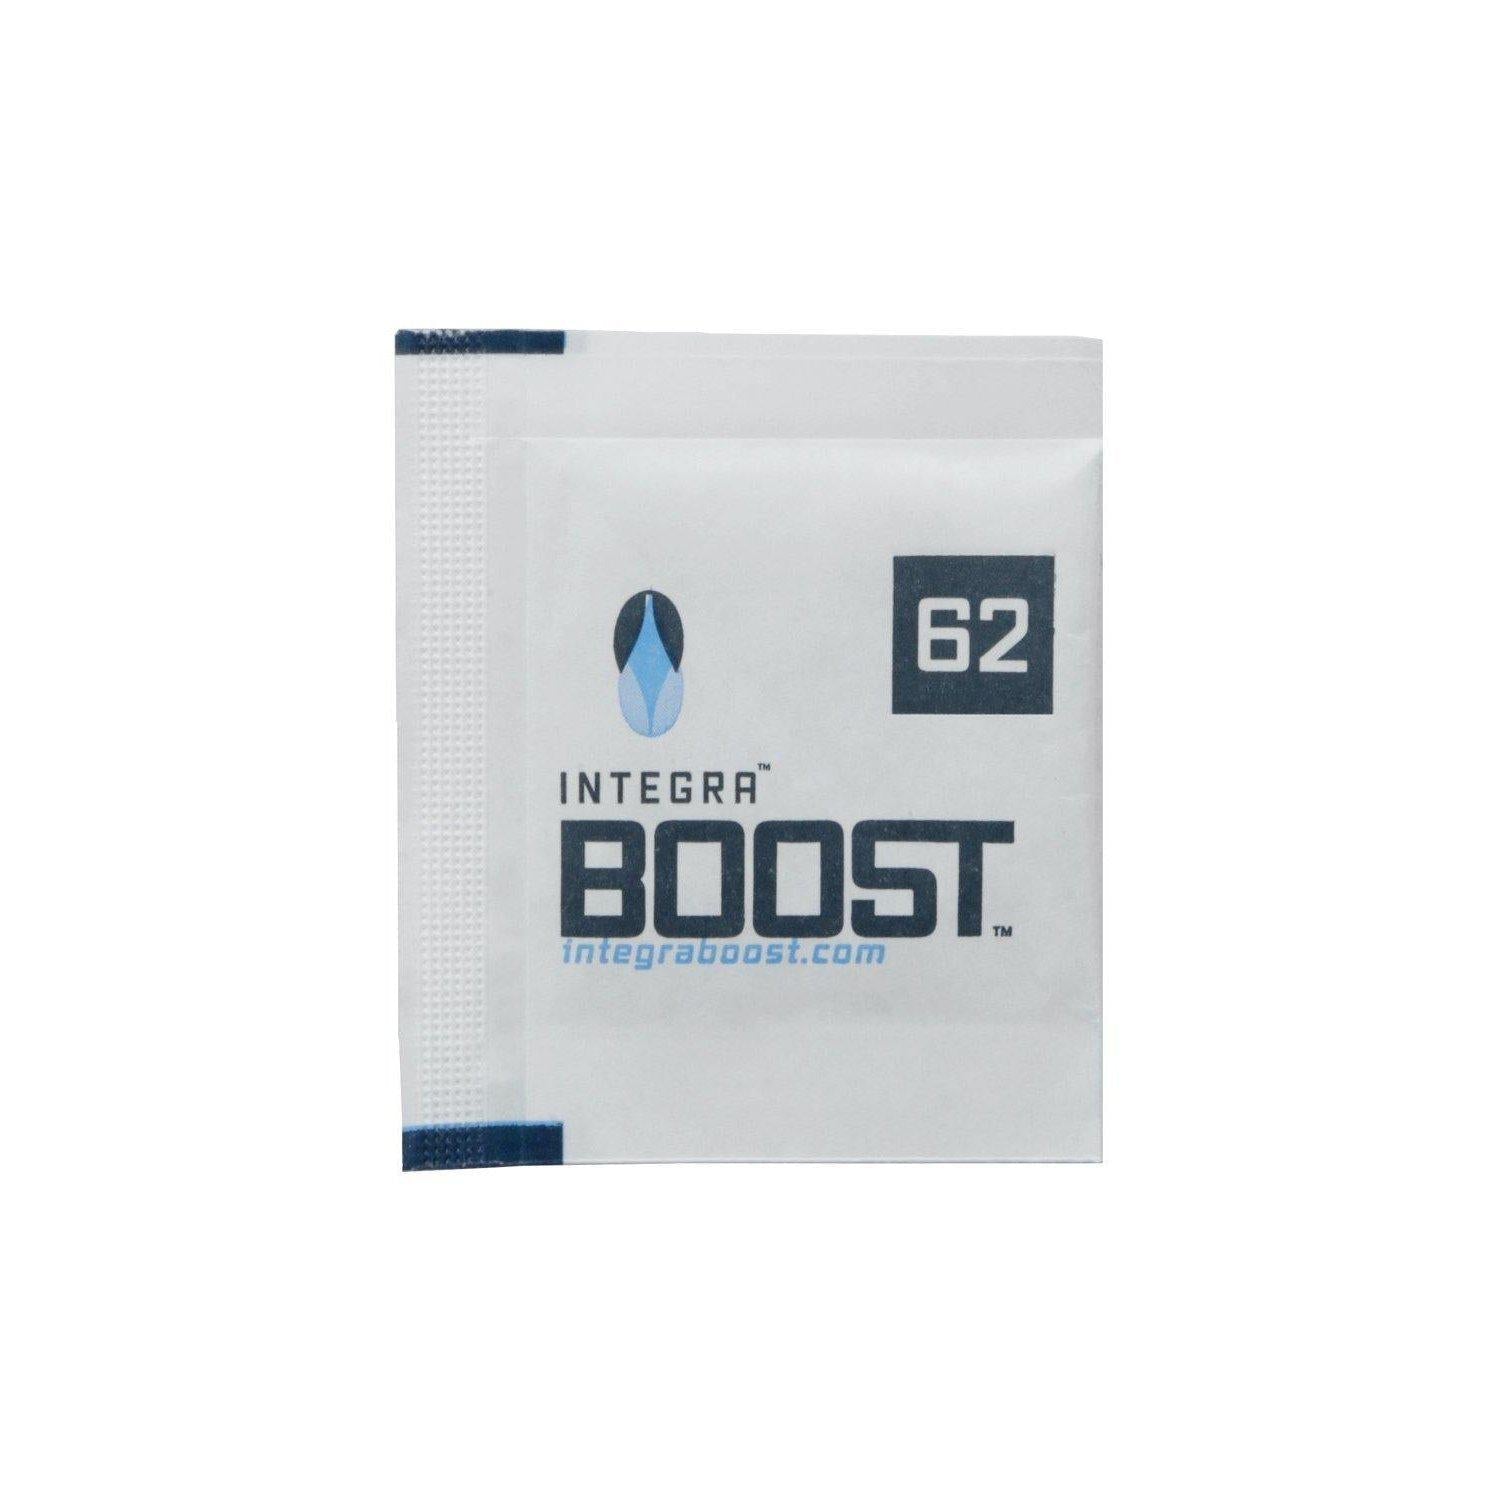 Accessories - Humidiccant / Humidity Packets by Integra Boost - Gardin Warehouse